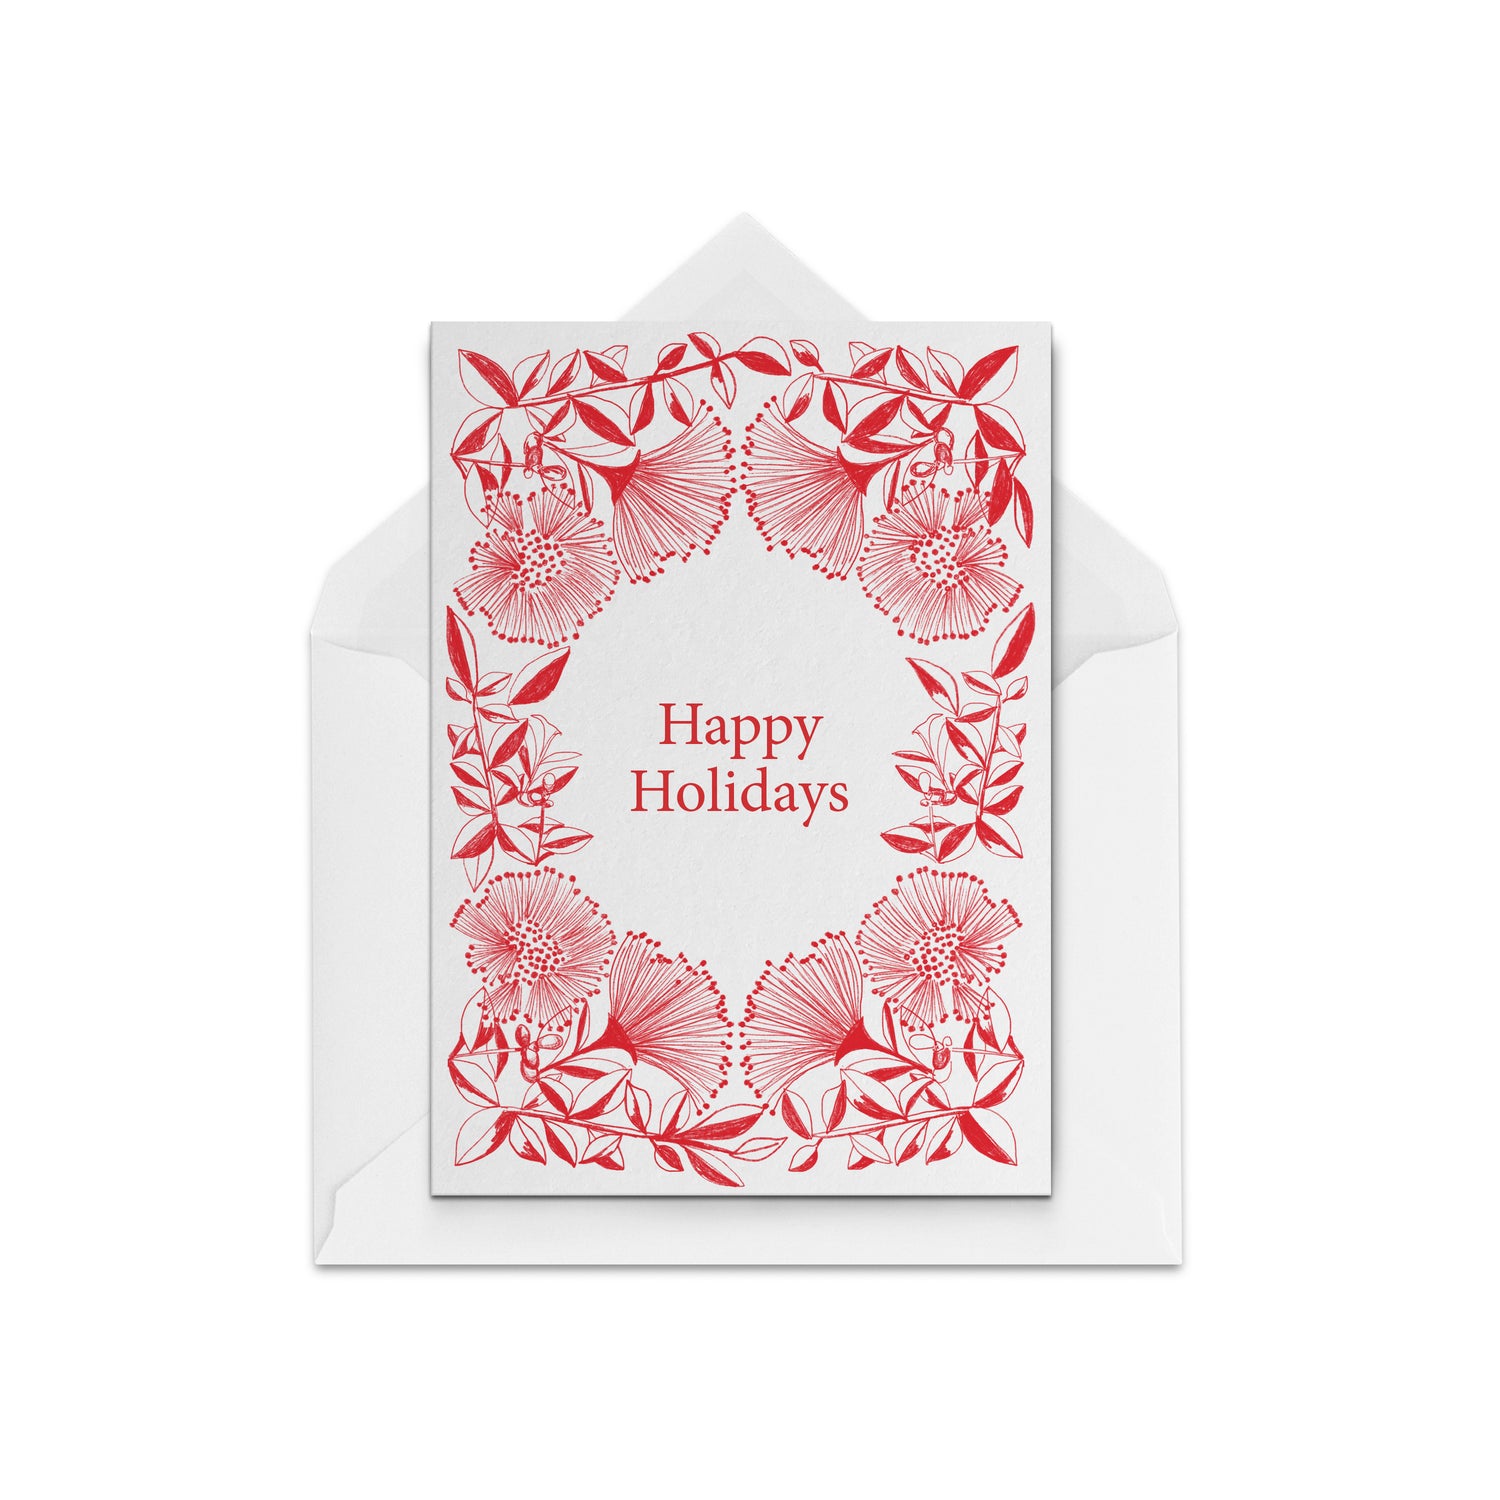 Happy Holidays Christmas Card by The Paper People